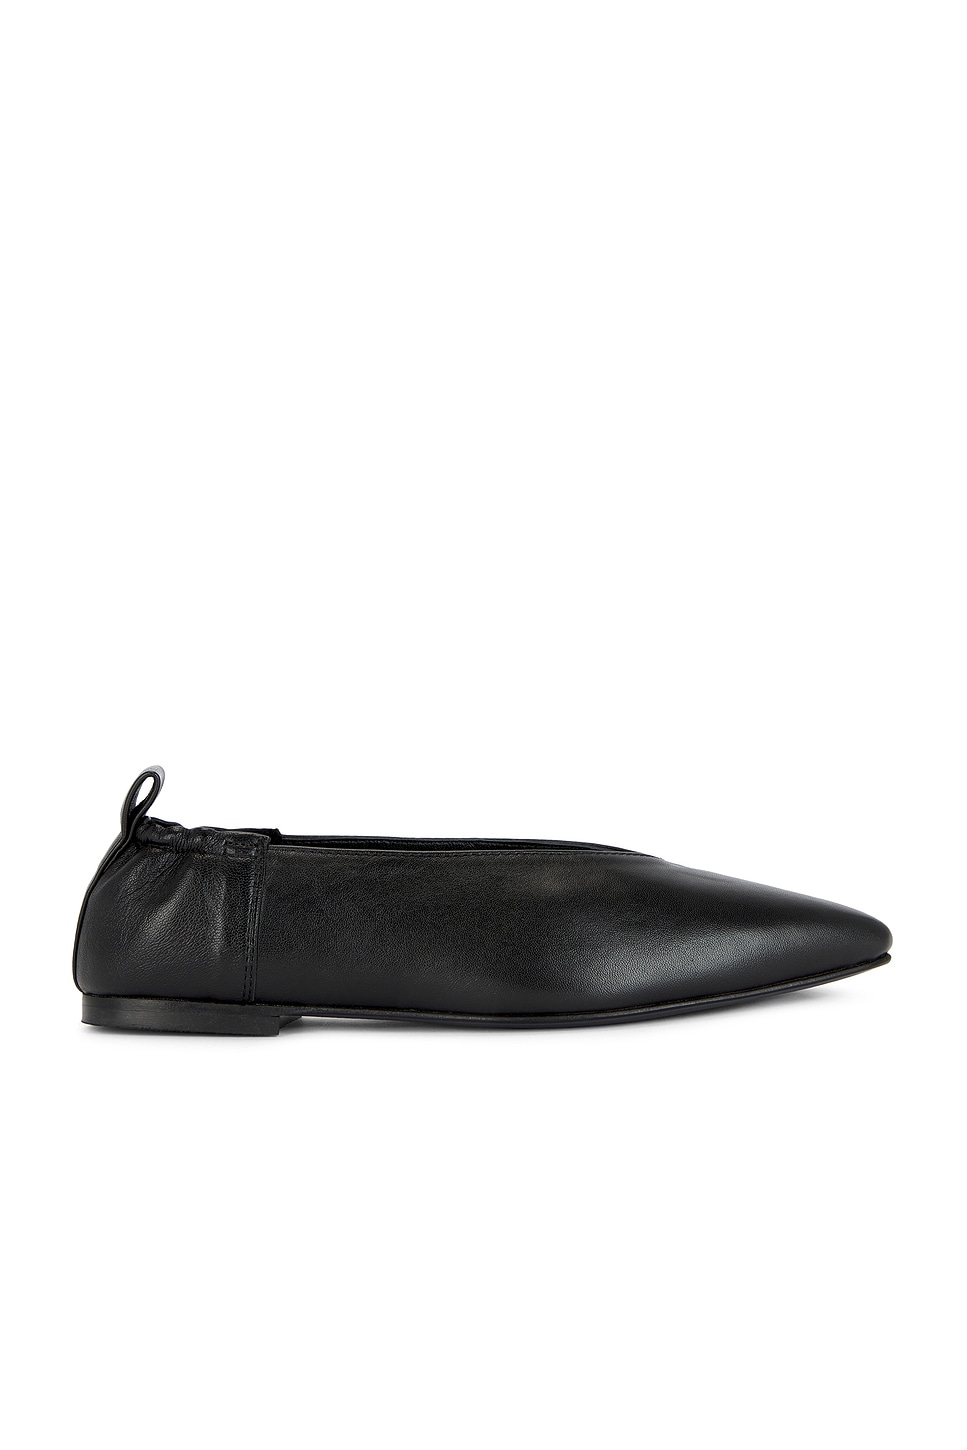 Image 1 of A.EMERY Briot Flat in Black